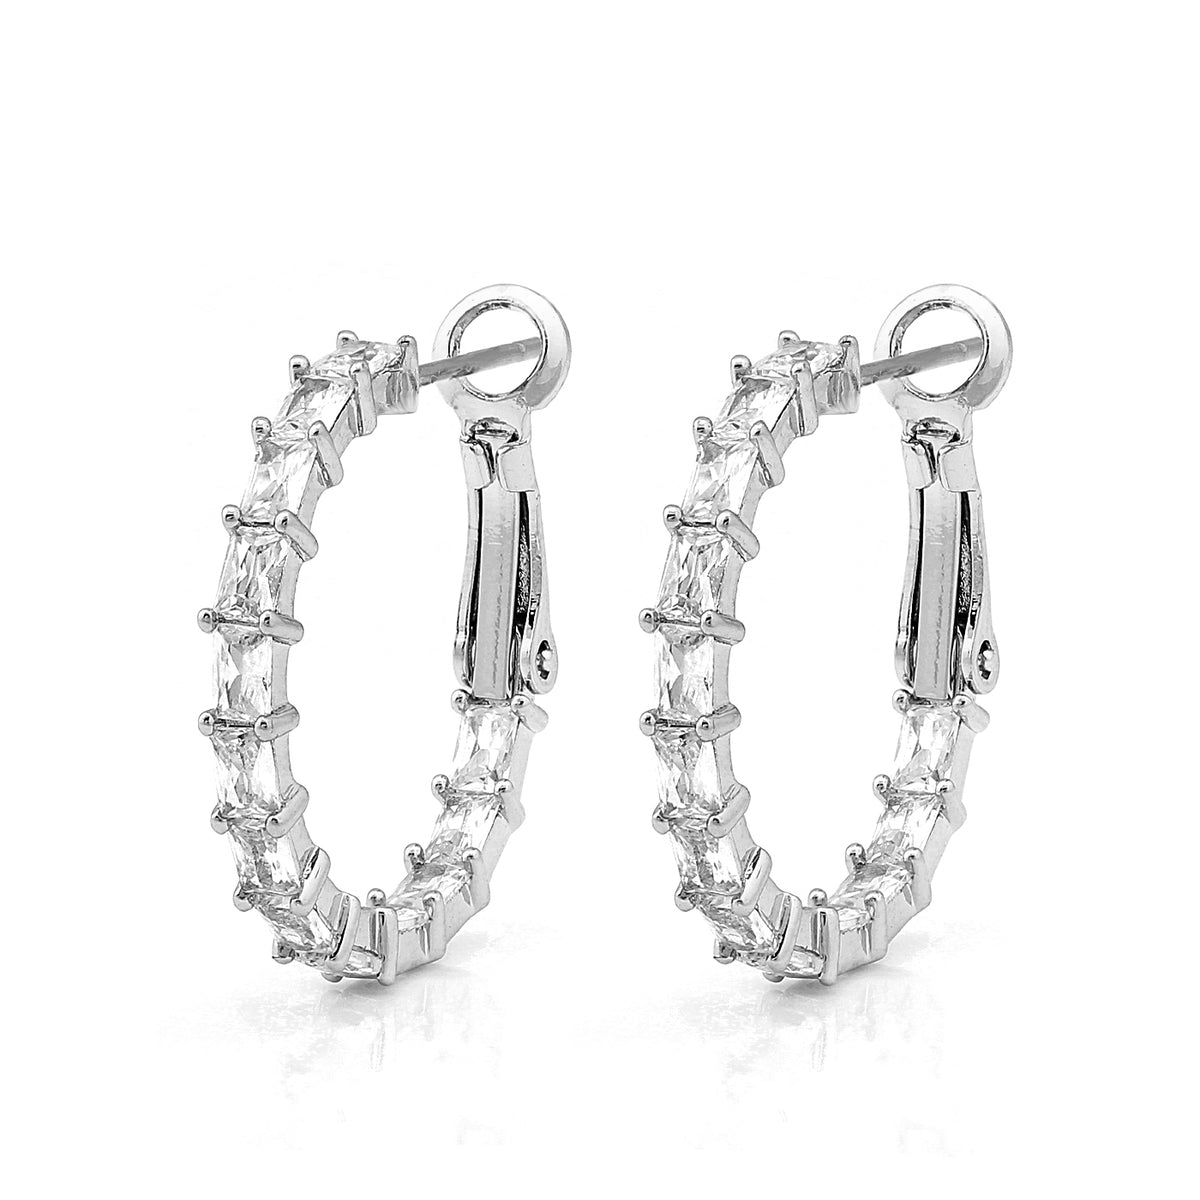 Square shaped cz hoops